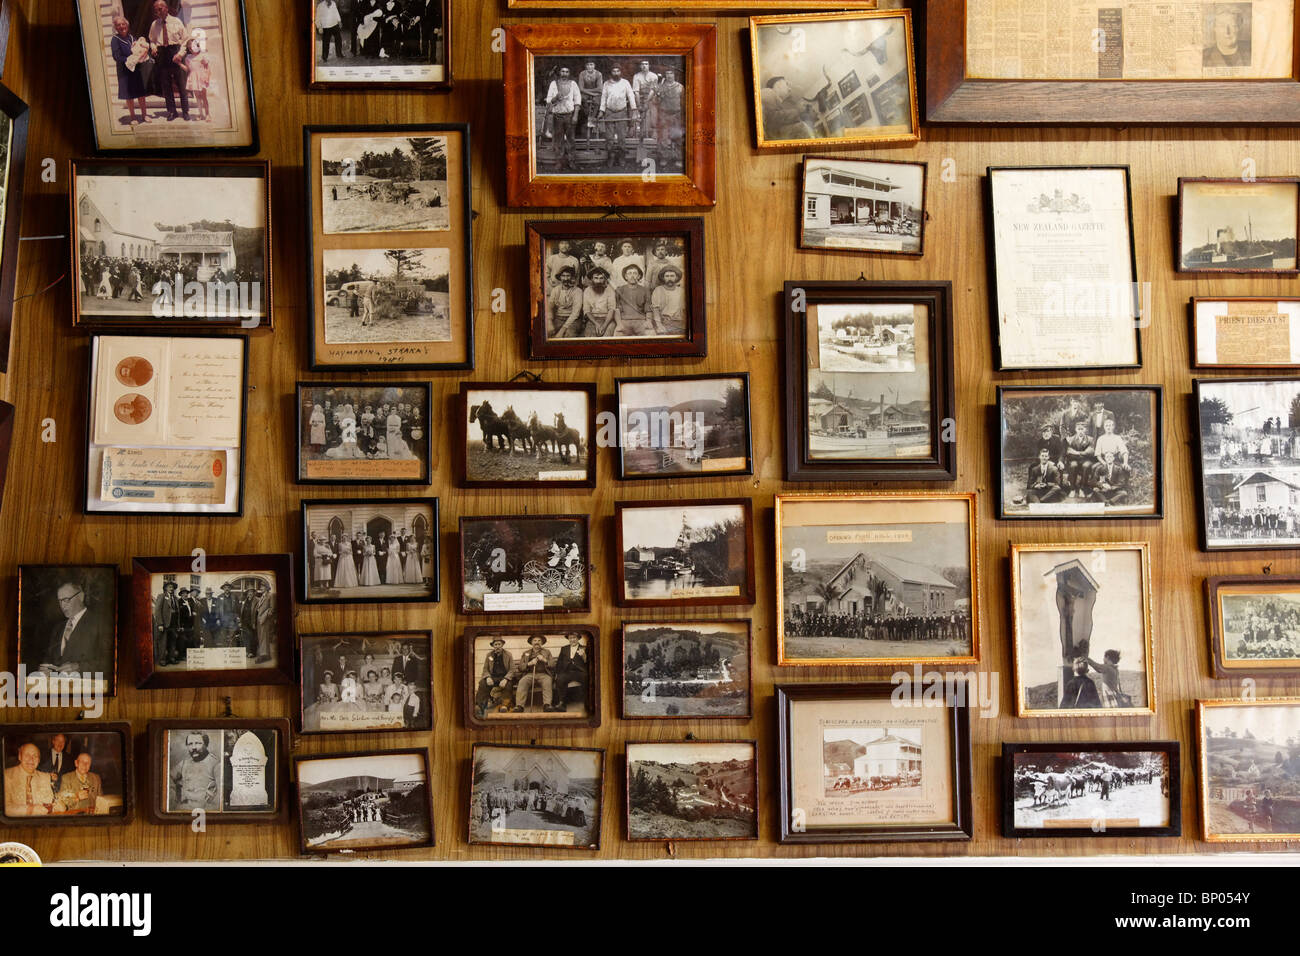 Old items and memorabilia hanging on the walls of the Puhoi pub, New Zealand Stock Photo